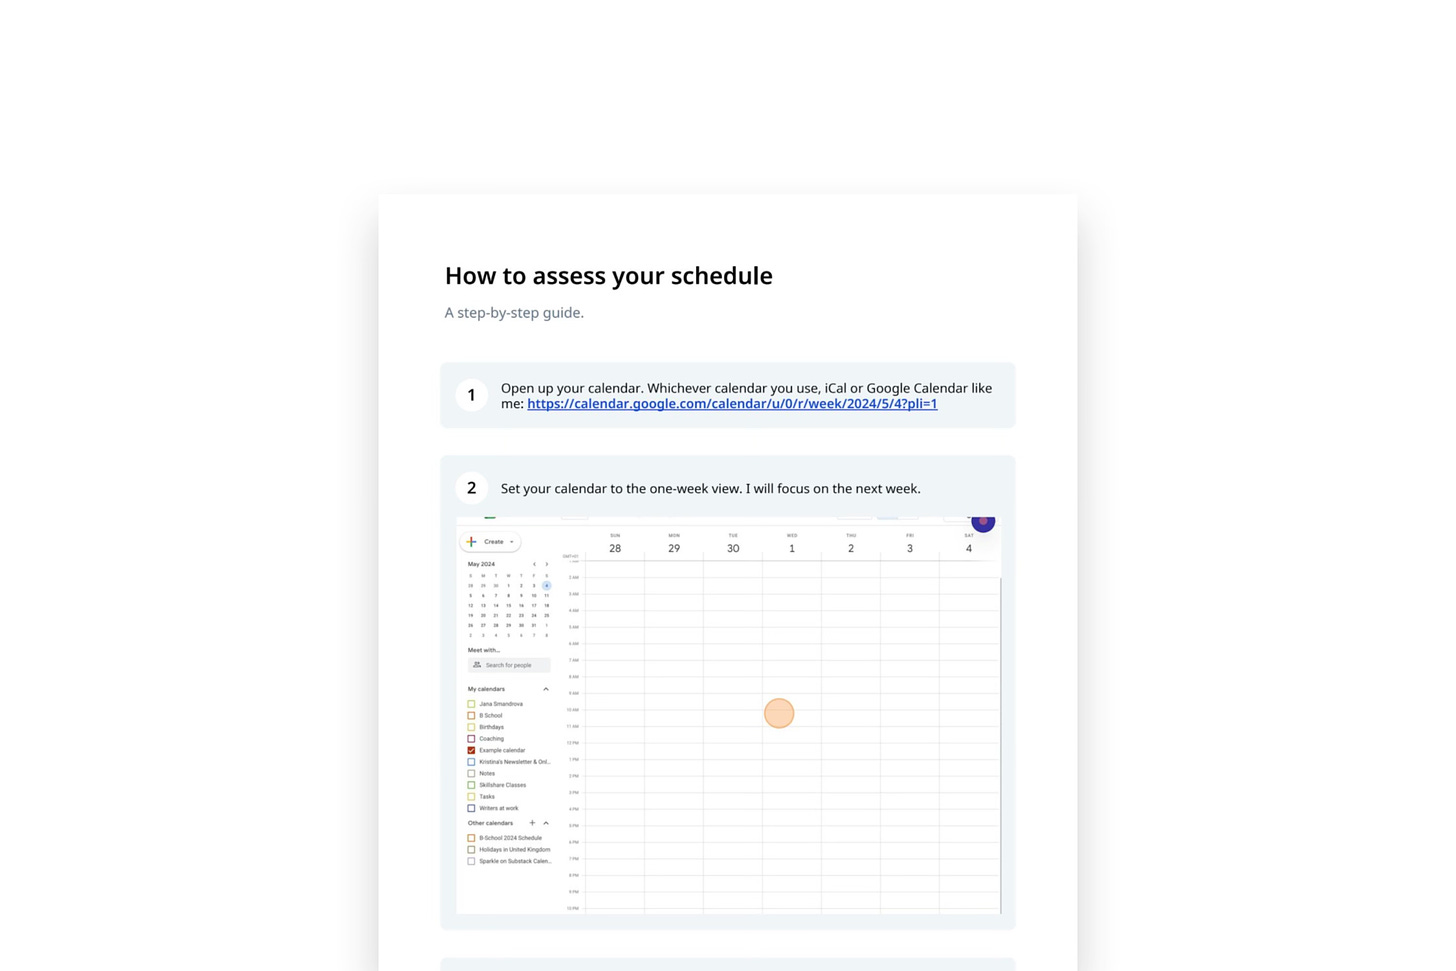 How to assess your schedule, step-by-step guide created with Scribe